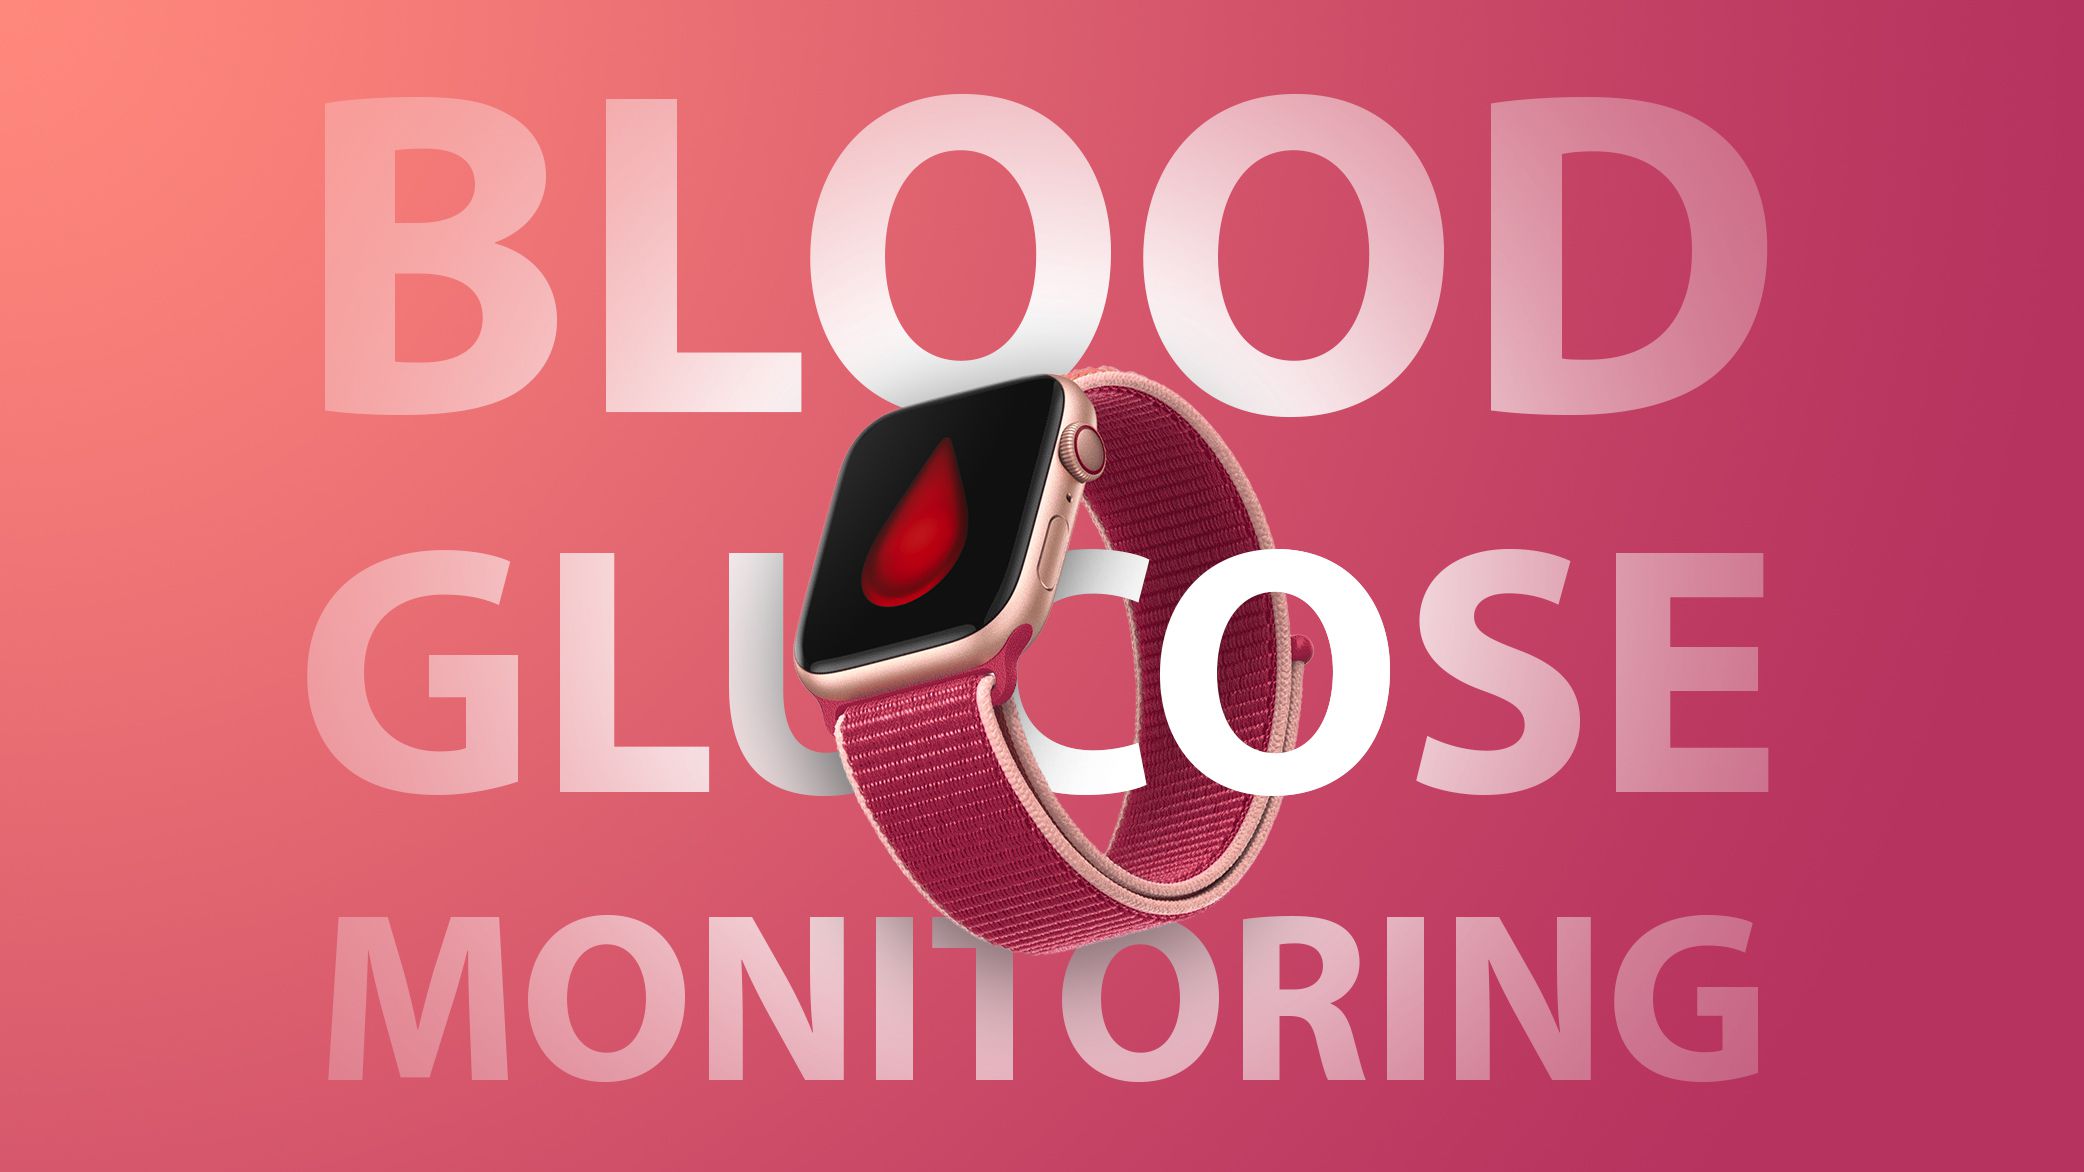 Apple's Noninvasive Blood Glucose Technology for Future Apple Watch Reaches 'Proof-of Concept' Stage - macrumors.com